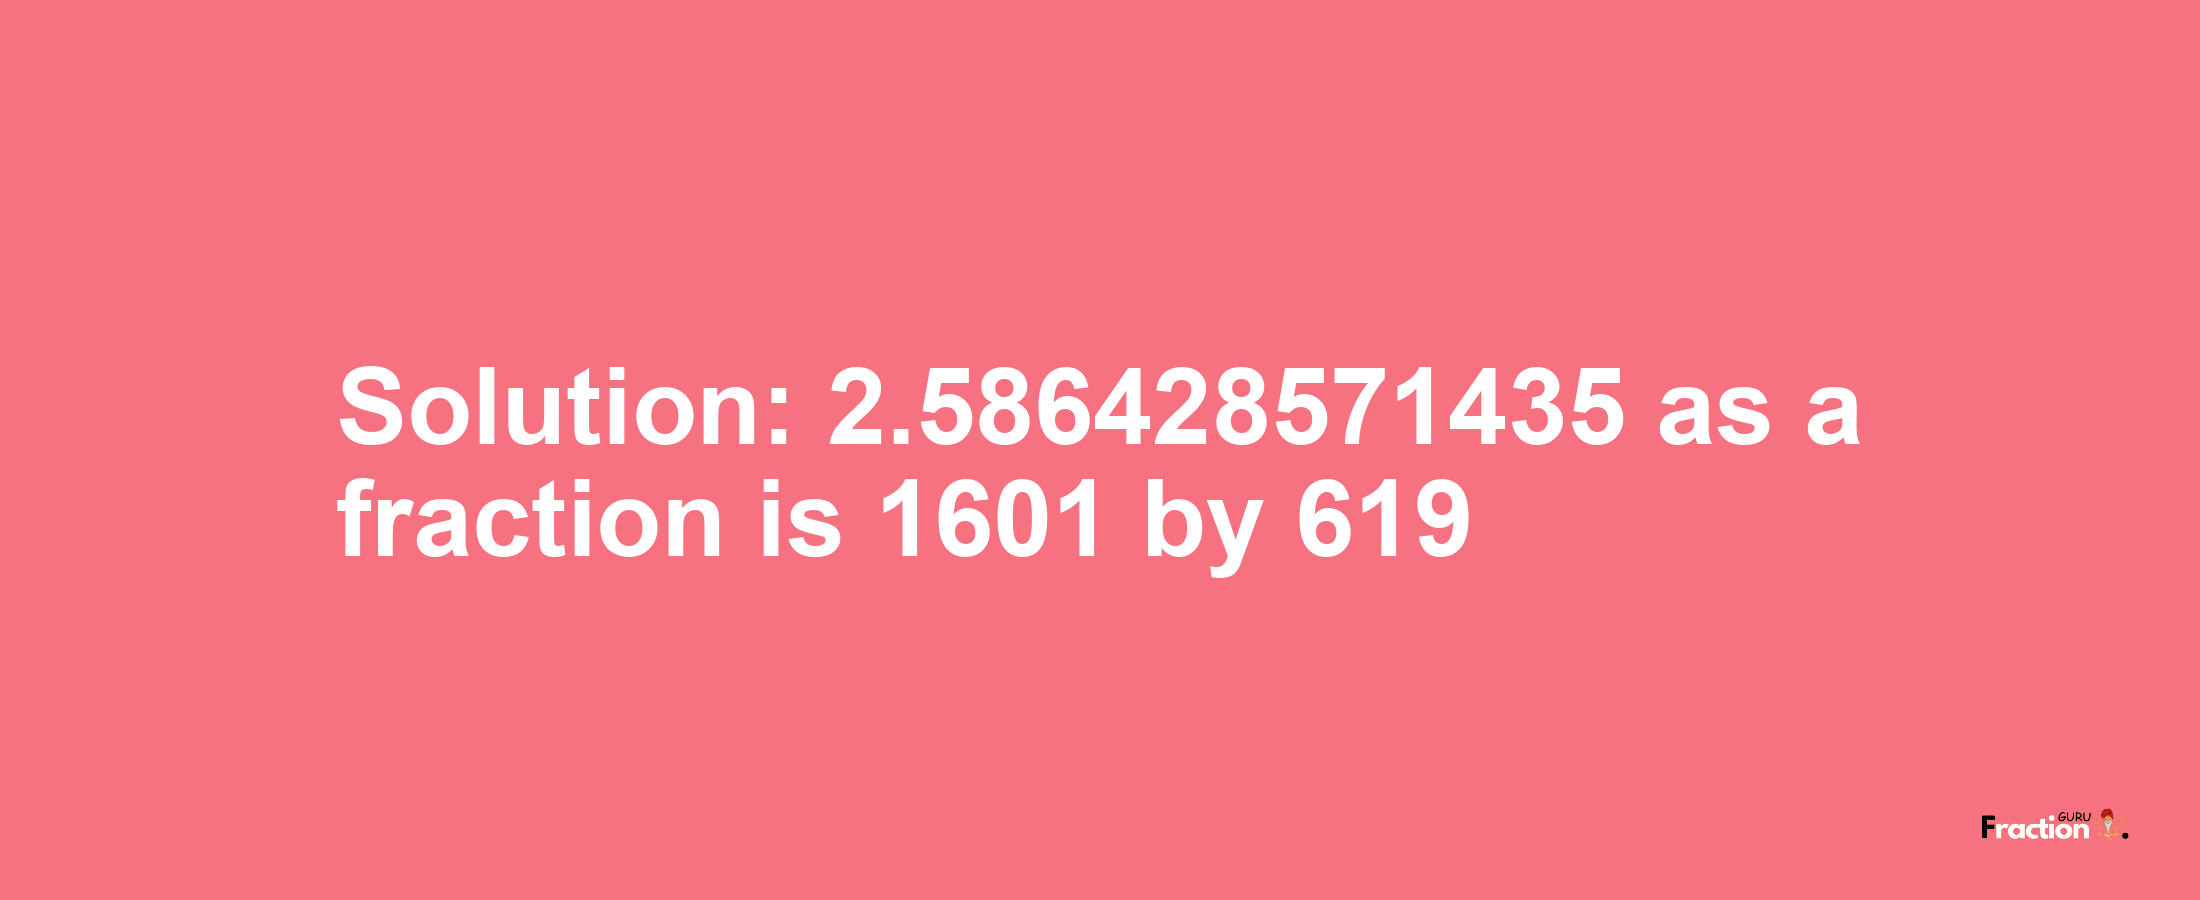 Solution:2.586428571435 as a fraction is 1601/619